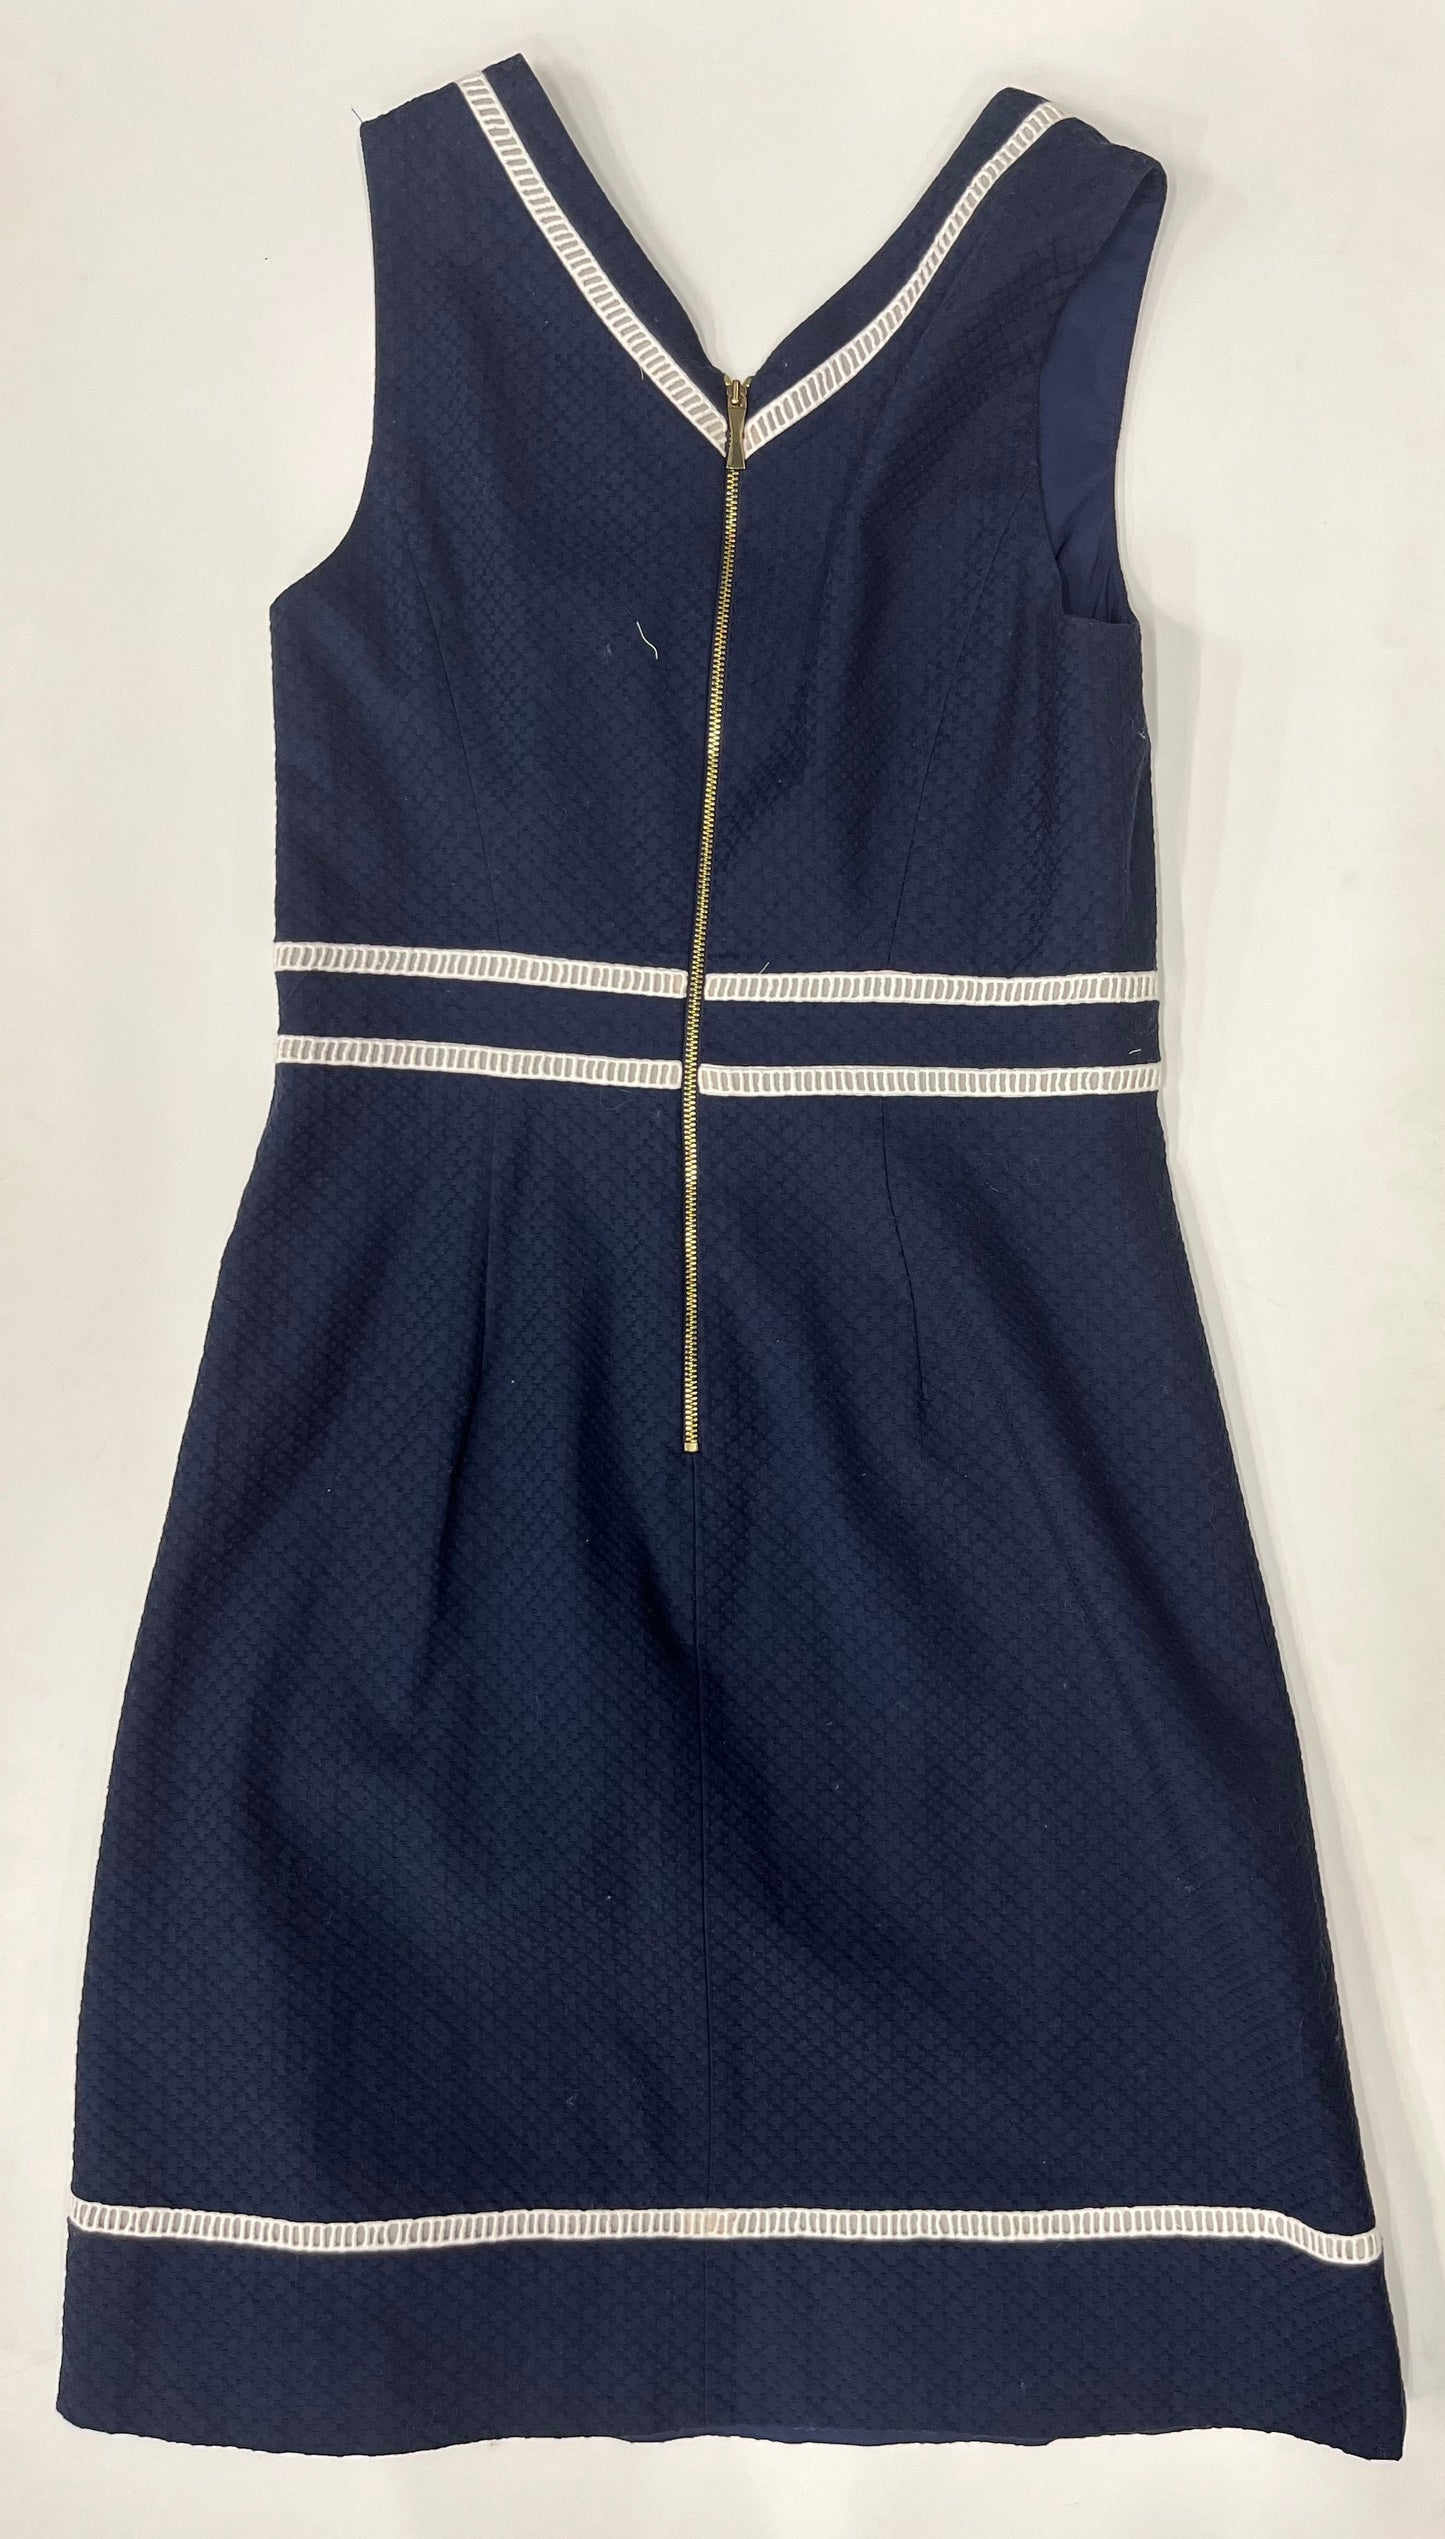 Dress Work By Kate Spade NWT  Size: S